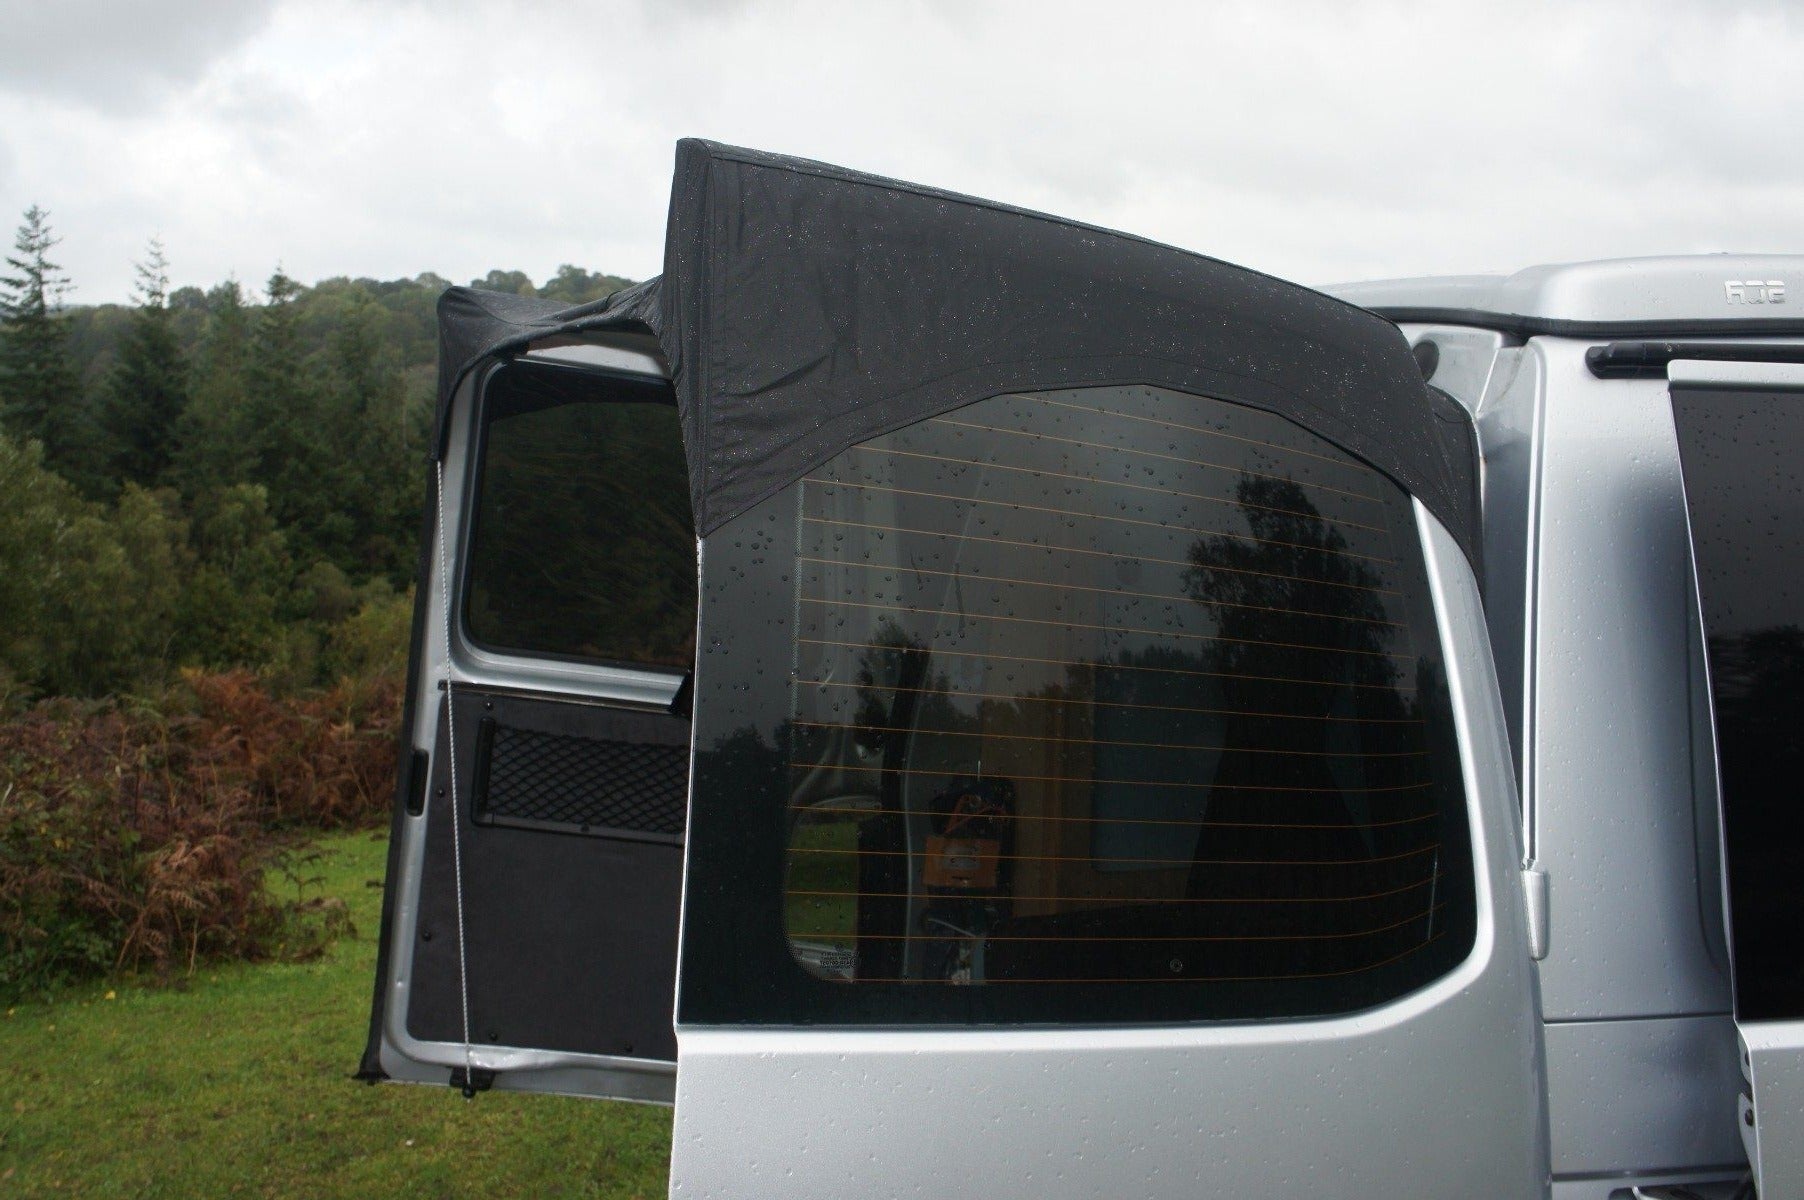 VW TRANSPORTER T6/T6.1 REAR DOOR AWNING COVER TAILORED (2015 ONWARDS) BLACK  401